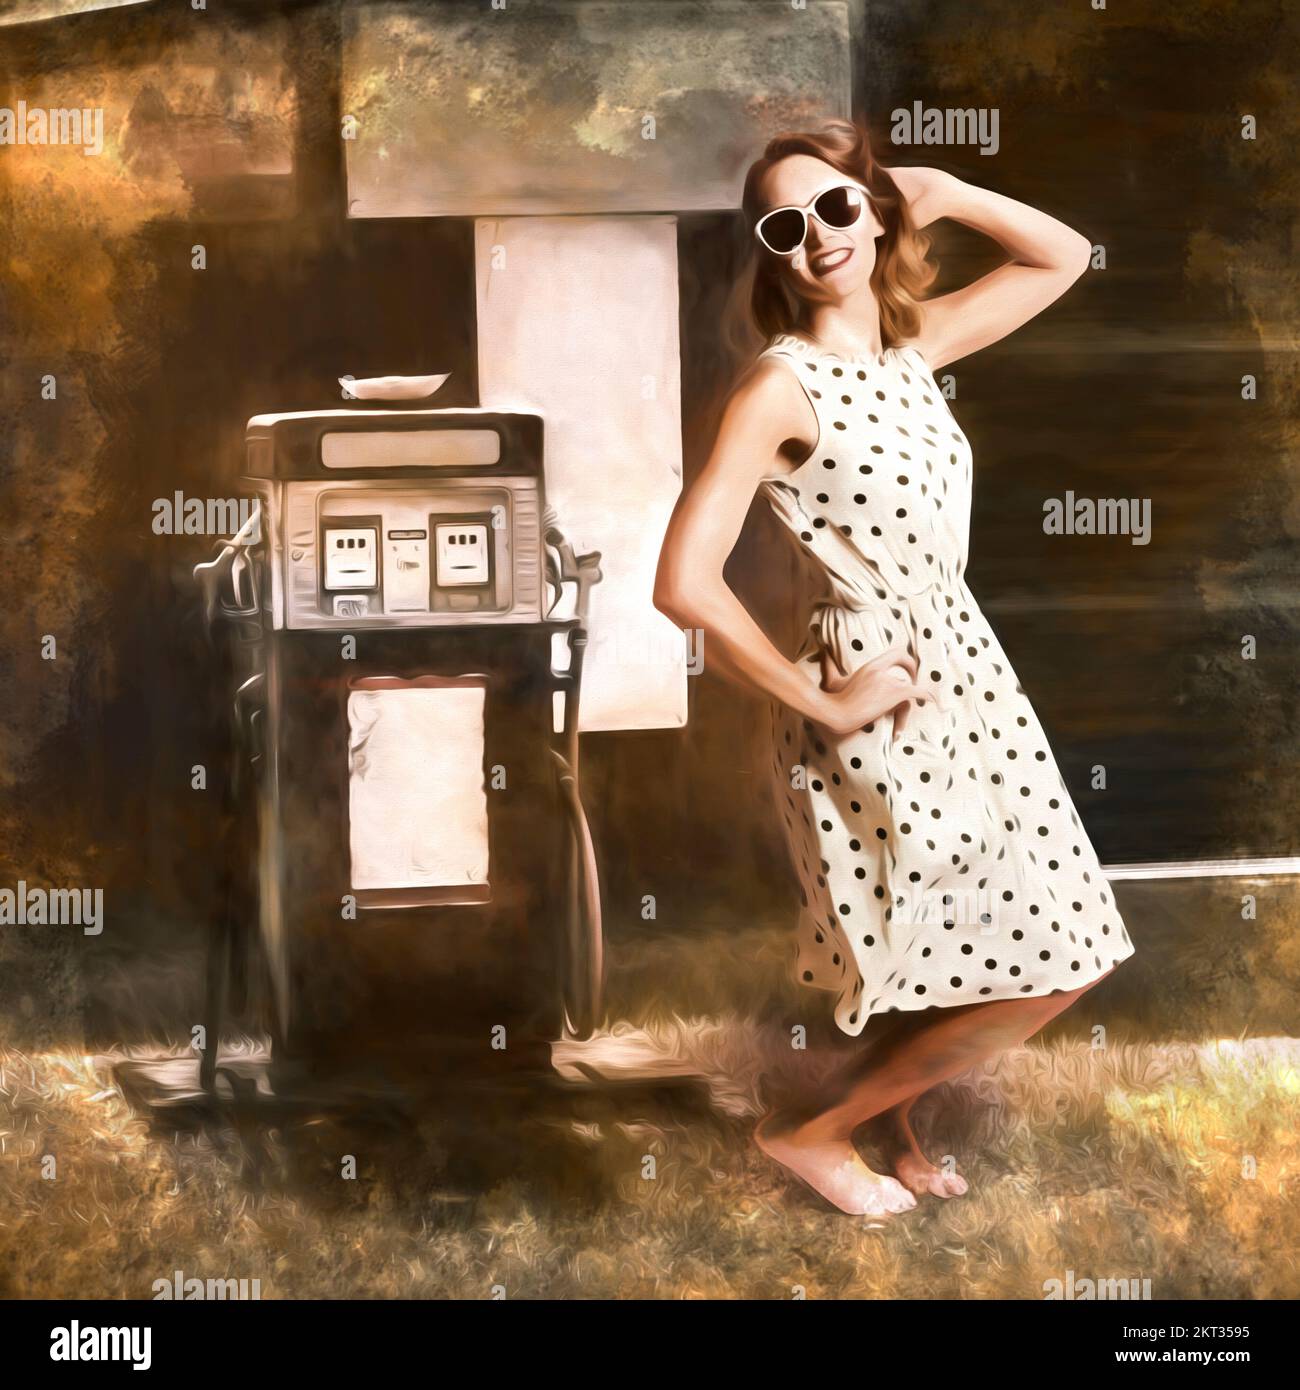 Fine art digital painting of a vintage gas pump girl, striking a fashionable pose in fifties style housewife clothing. Roadhouse petrol pump pinup Stock Photo